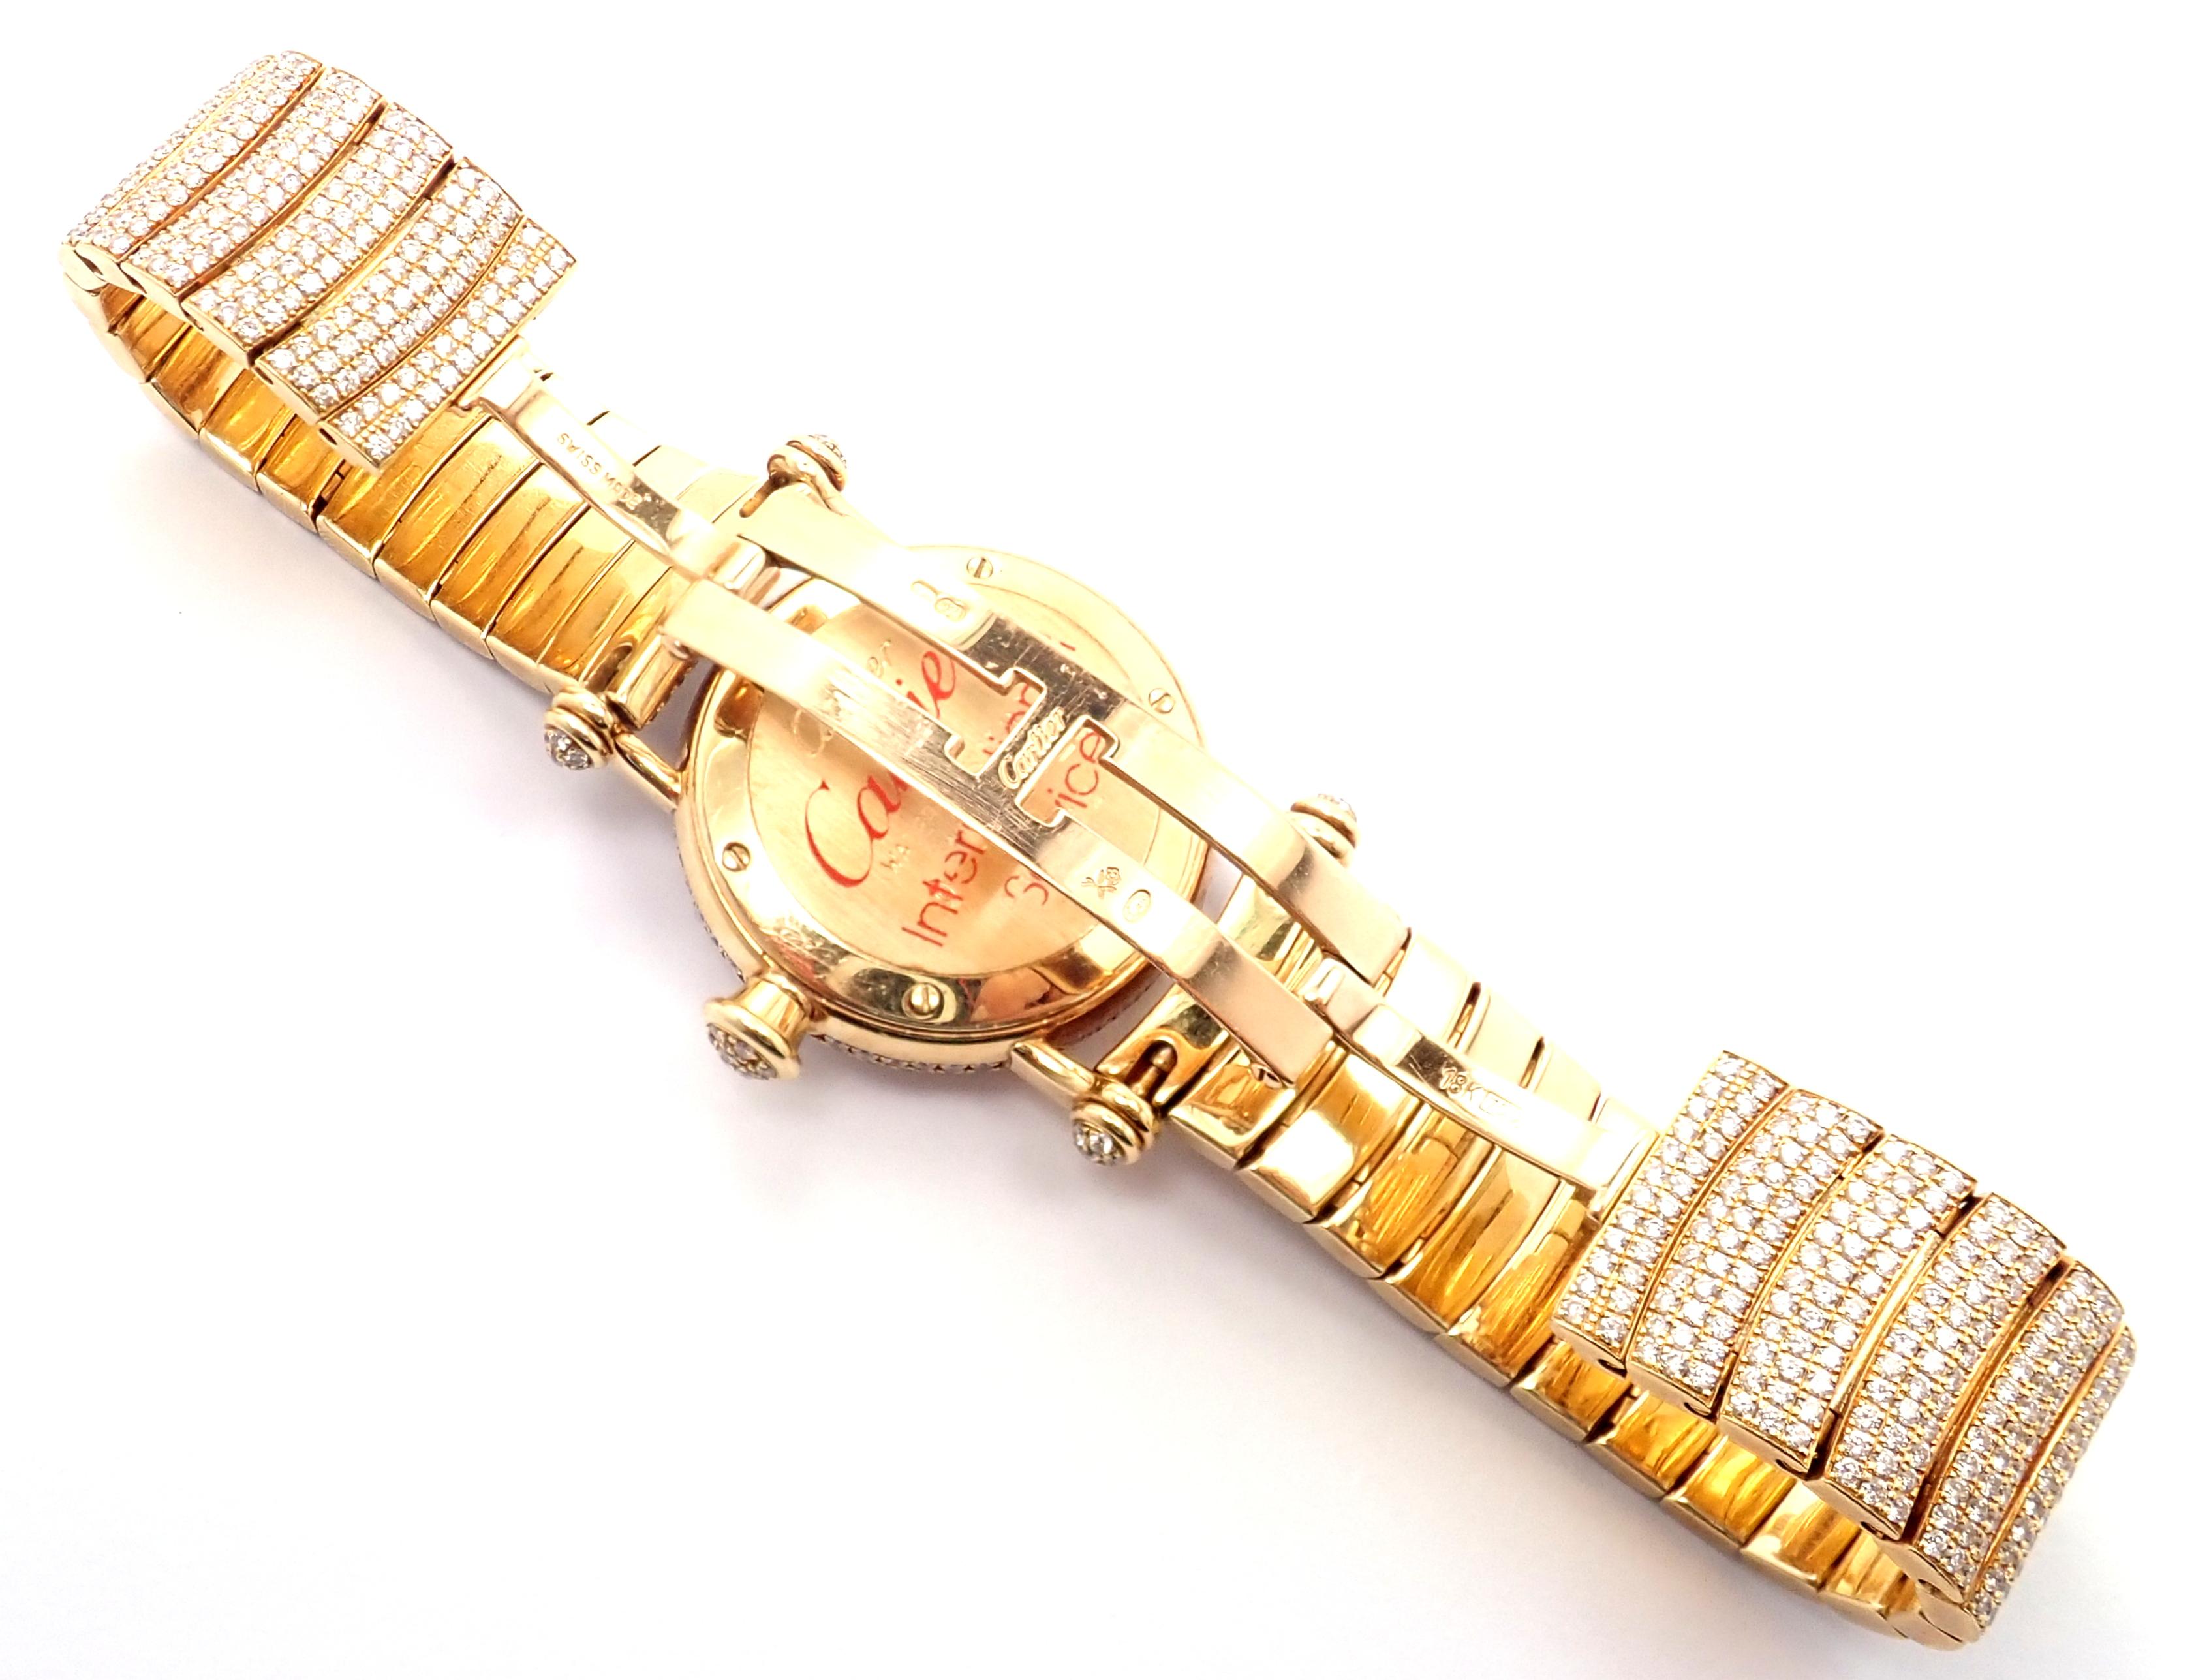 Cartier Diabolo Pave Diamond Yellow Gold Quartz Wristwatch 1450 In Excellent Condition For Sale In Holland, PA